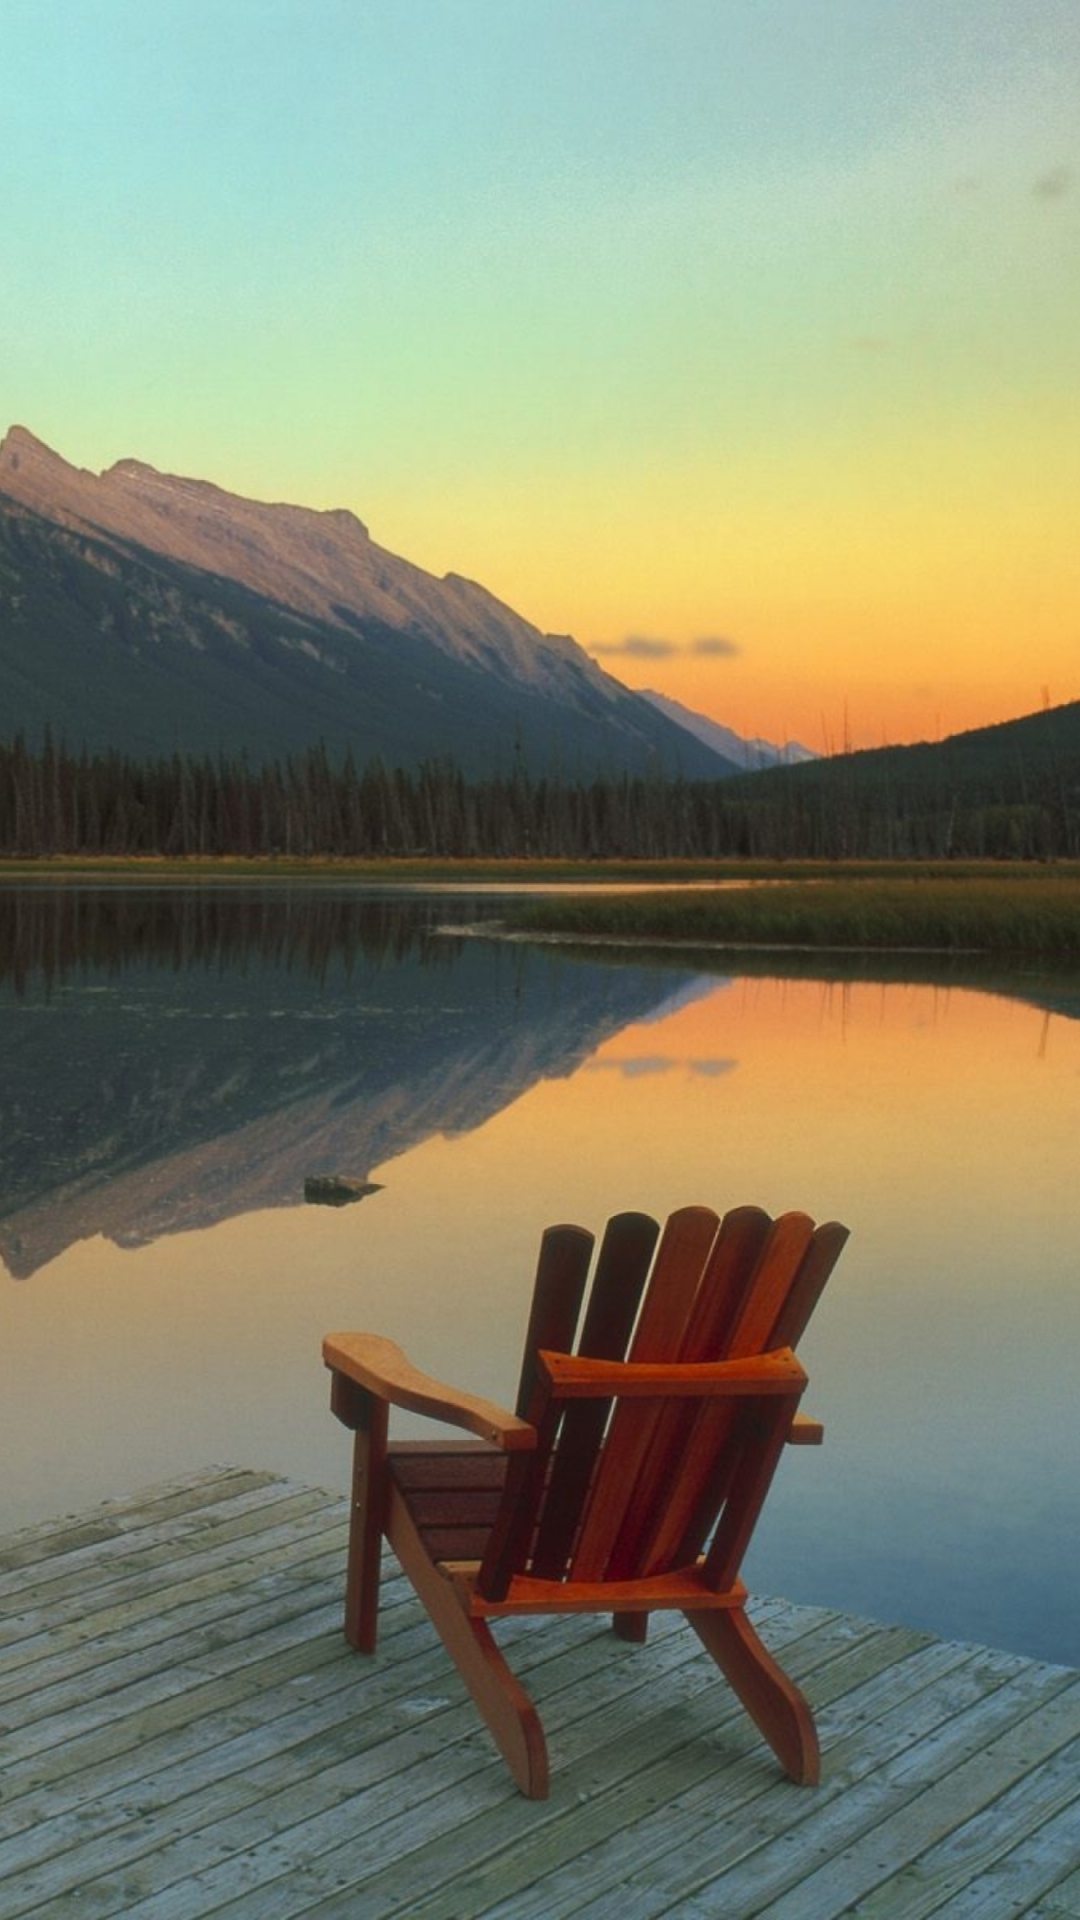 Wooden Chair With Pieceful Lake View screenshot #1 1080x1920